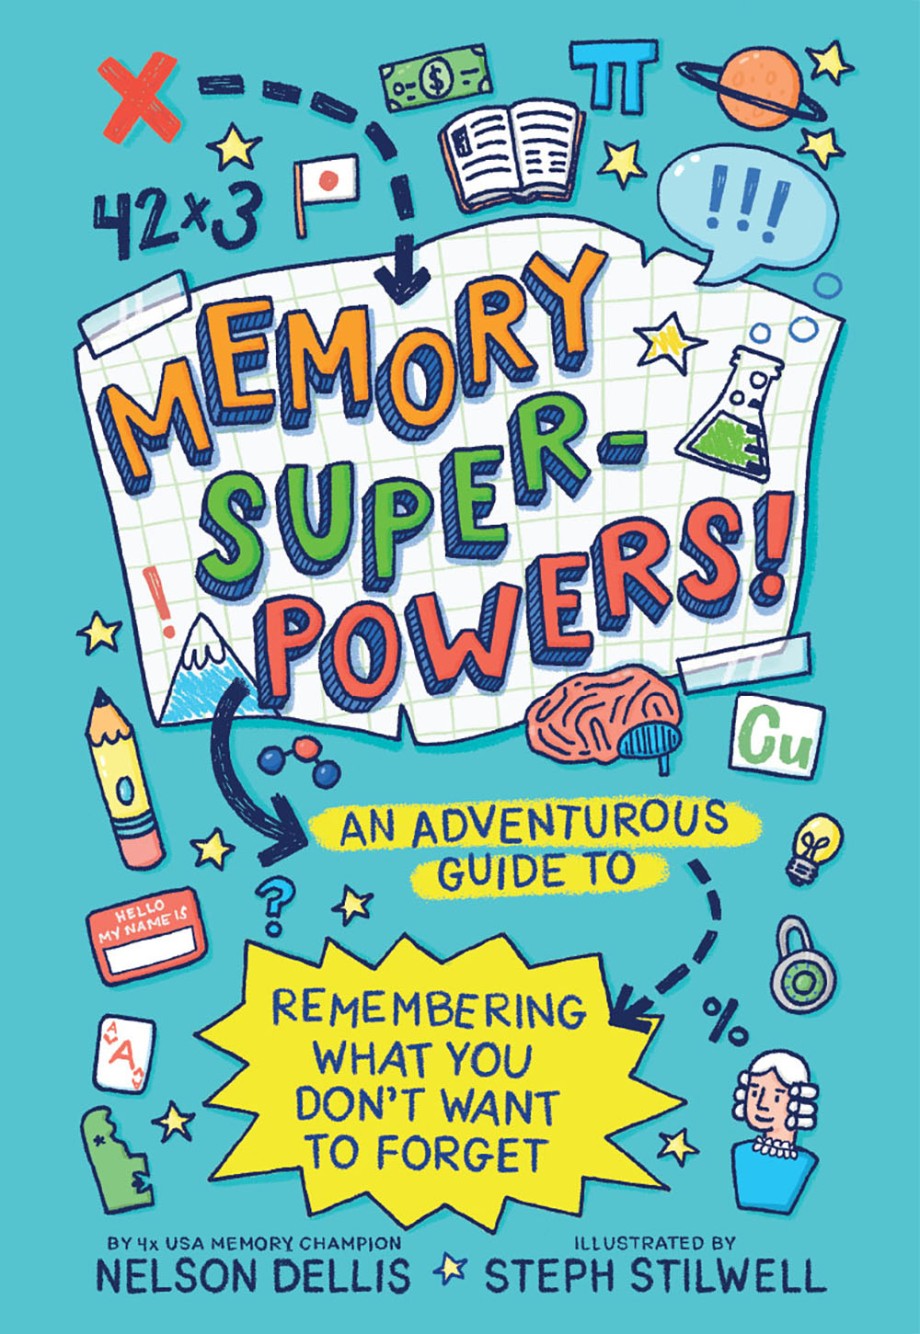 Memory Superpowers! An Adventurous Guide to Remembering What You Don't Want to Forget